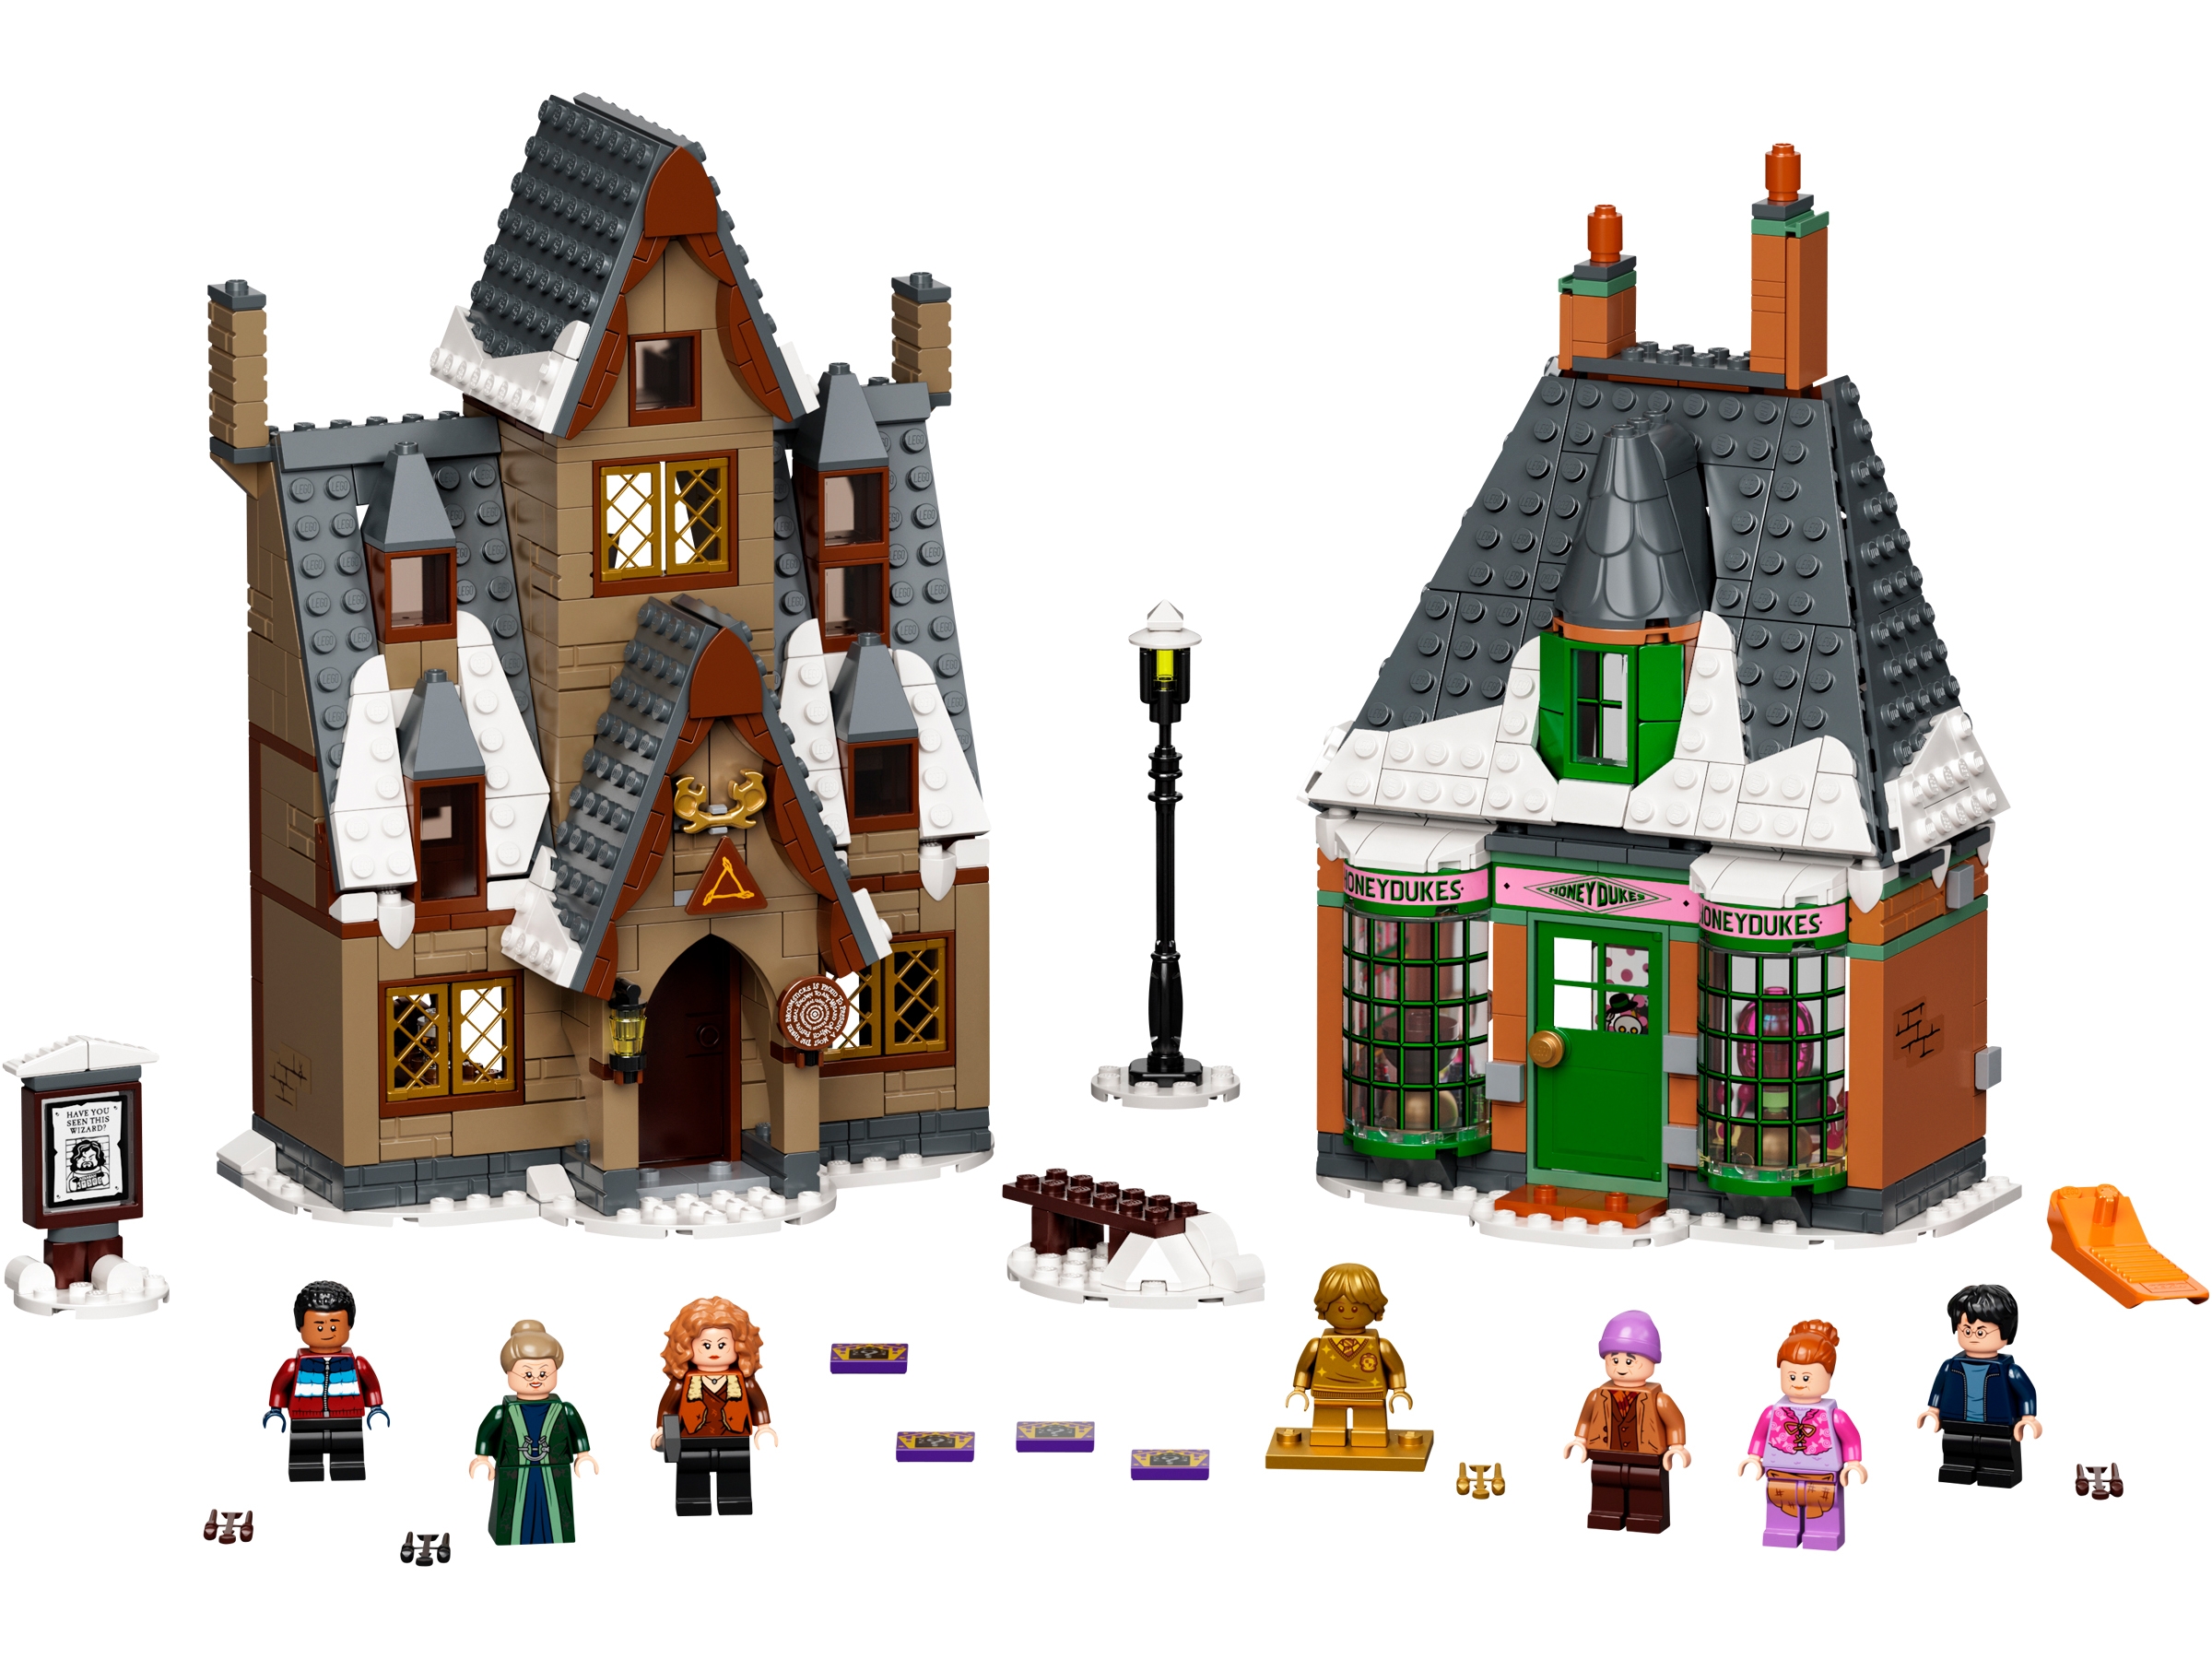 Find more New - 45pc Lego Harry Potter Jibbitz Lot for sale at up to 90% off